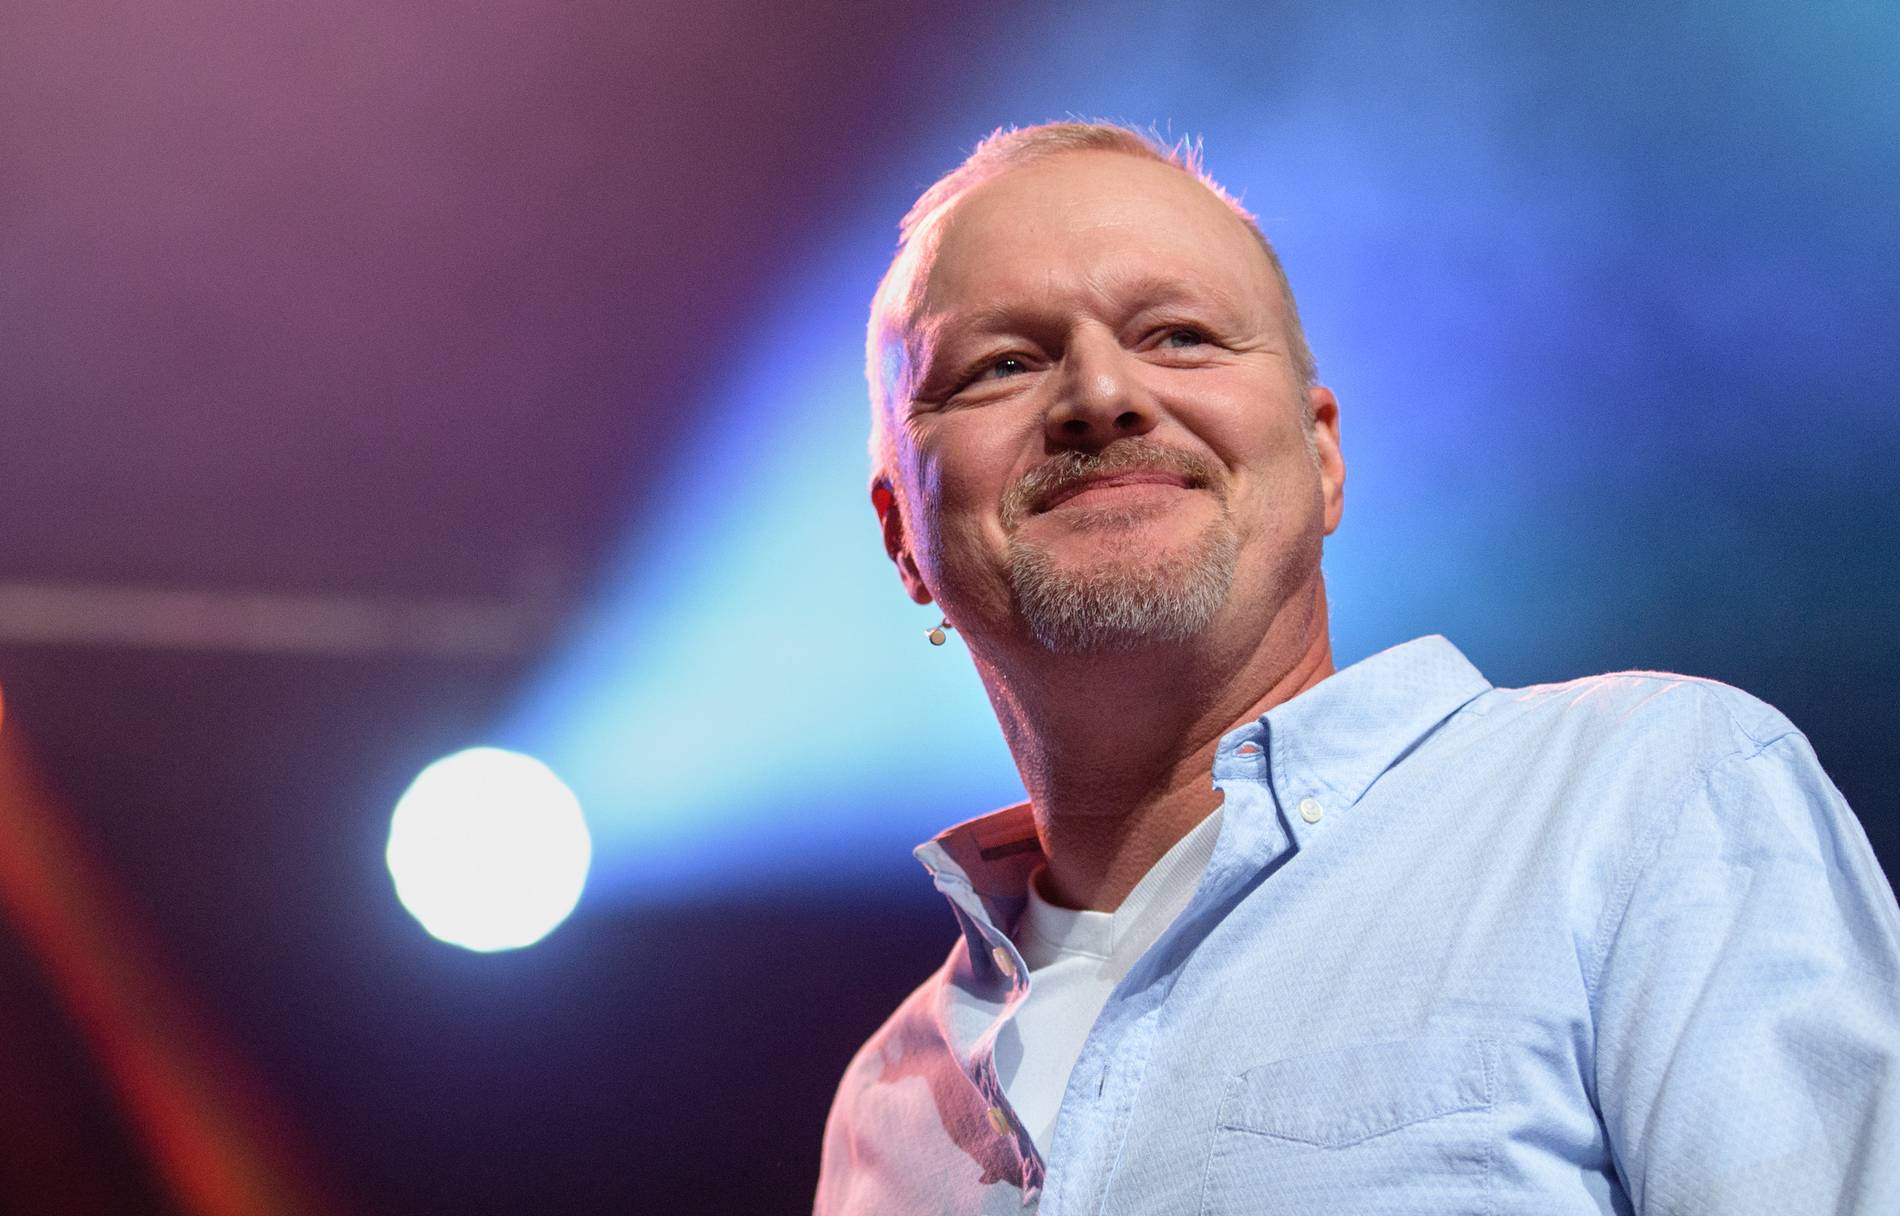 Stefan Raab Net Worth - From "TV Total" To Music Production